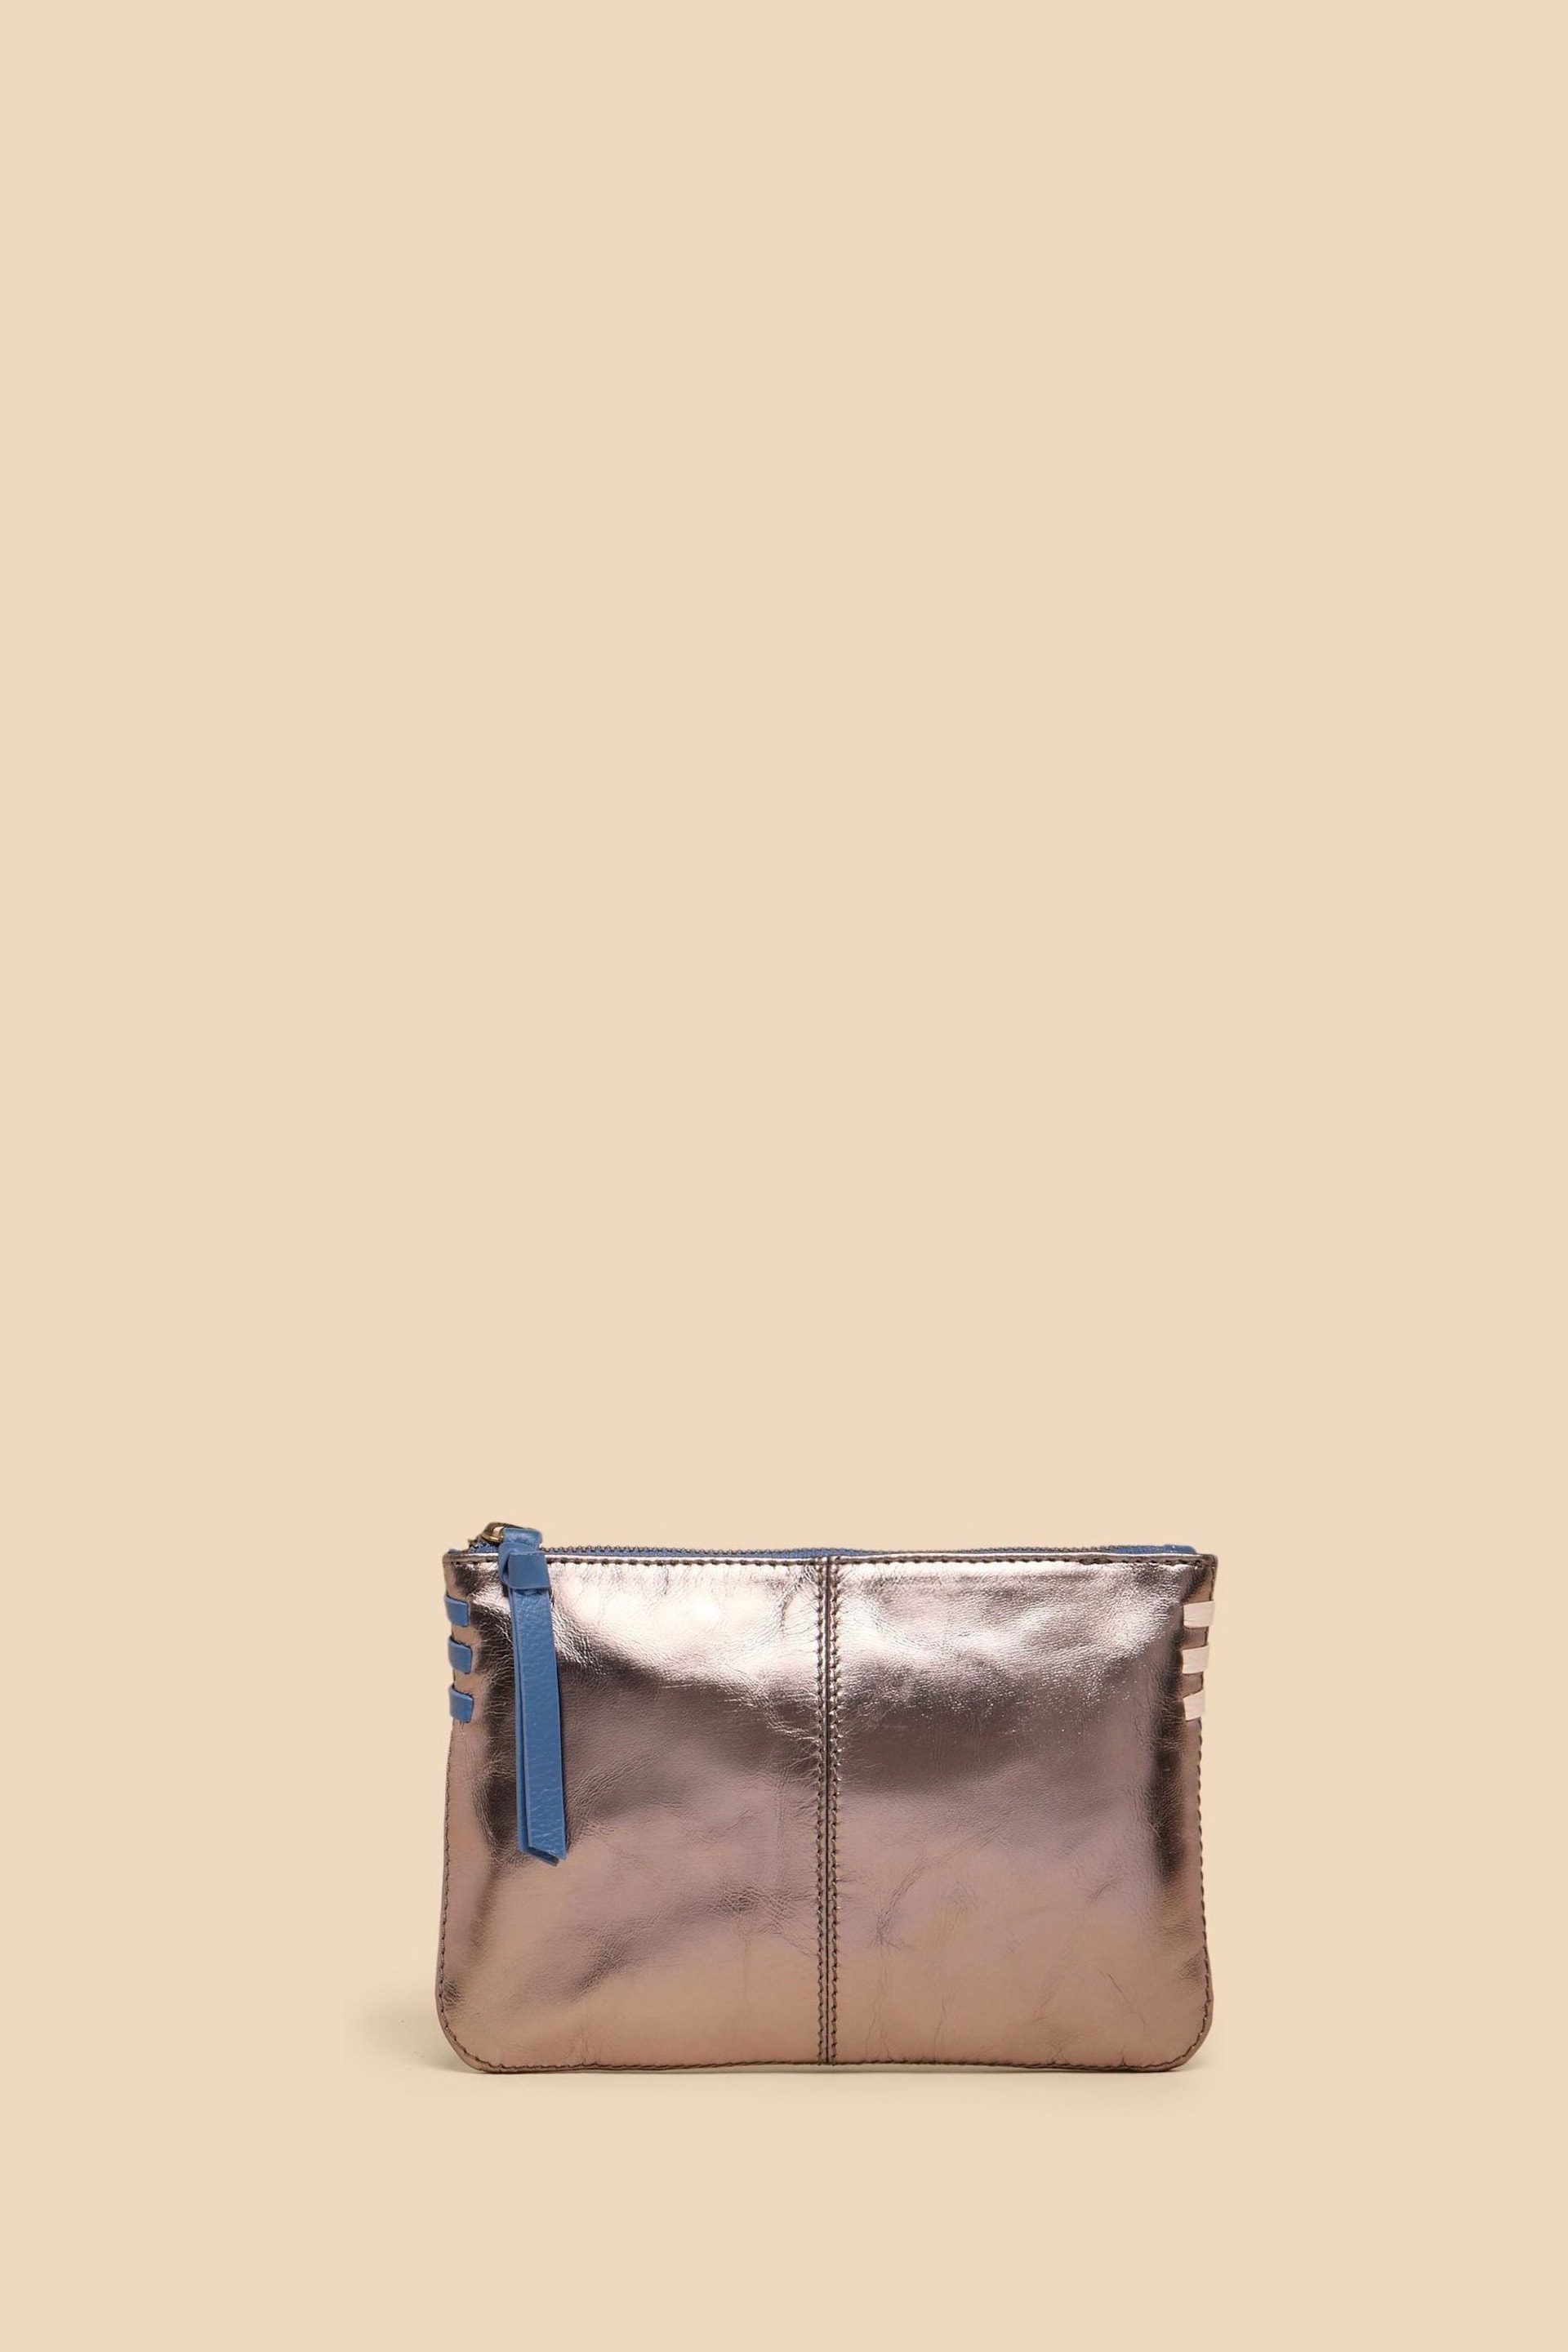 White Stuff Brown Leather Zip Top Pouch - Image 3 of 4